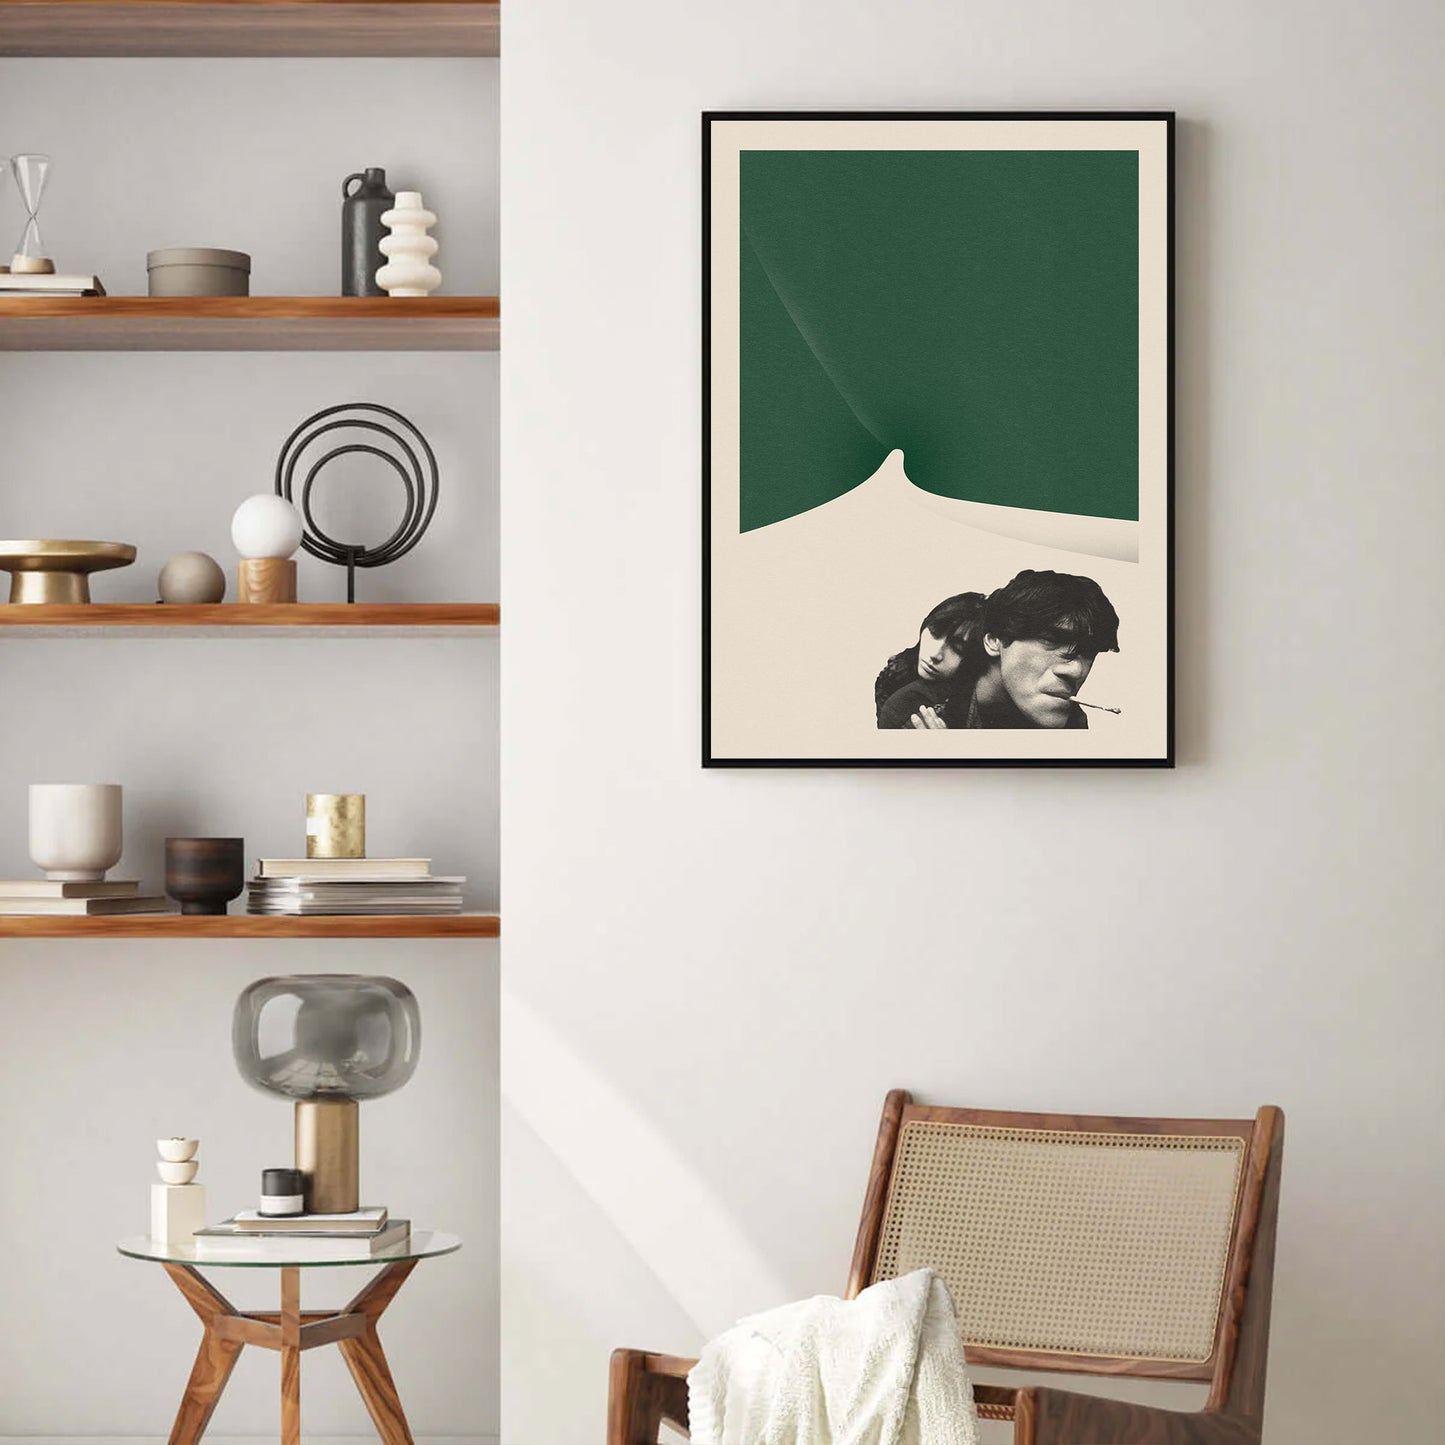 A living room with a museum quality art print featuring Wong Kar Wai, the Fallen Angels from thewallflowerclub brand.